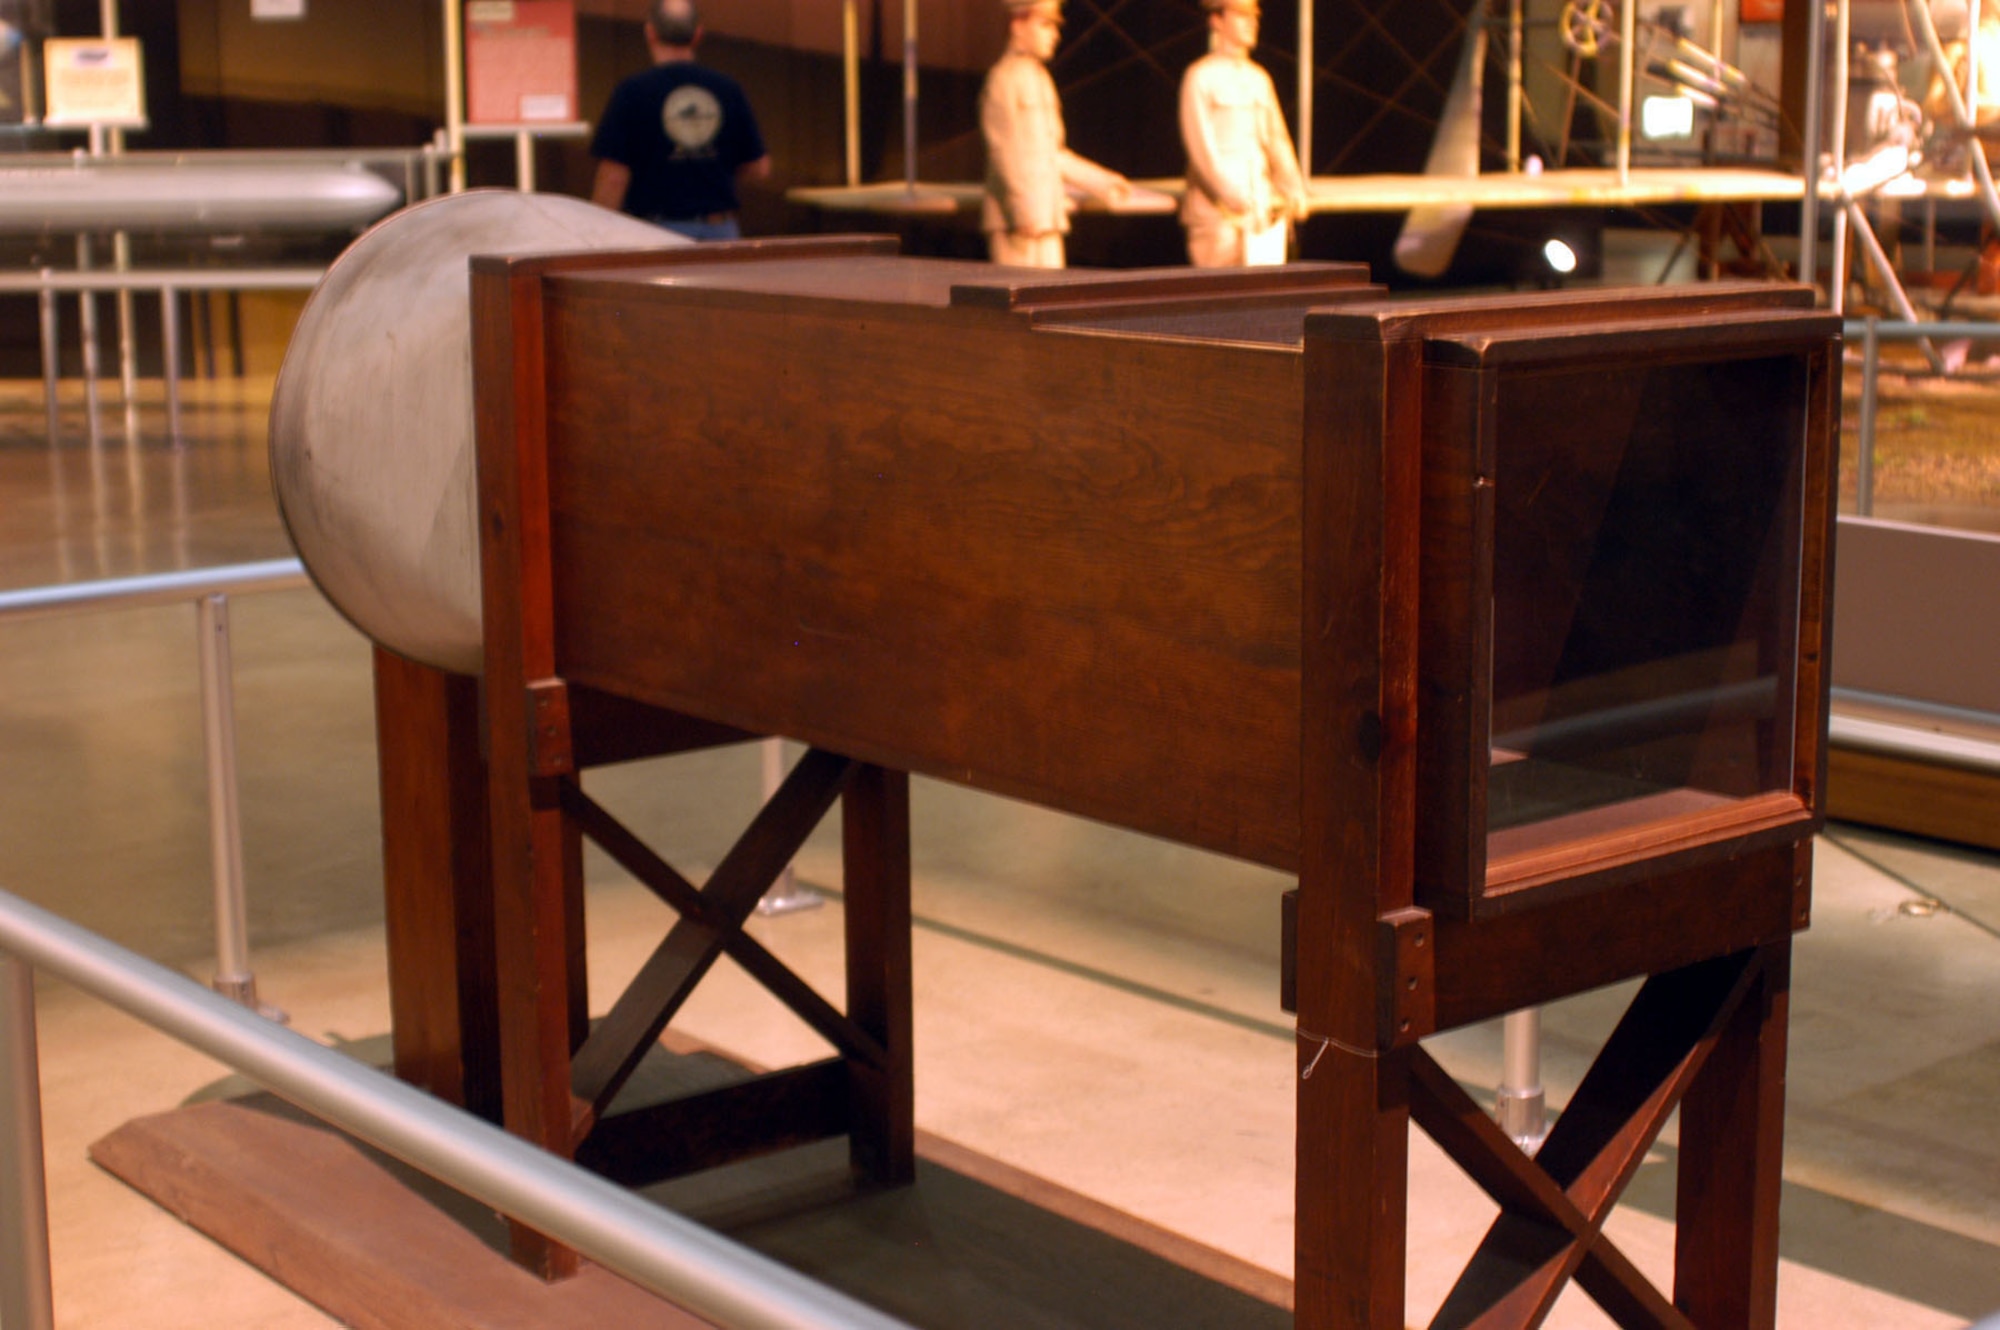 DAYTON, Ohio -- Wright Brothers 1901 Wind Tunnel on display in the Early Years Gallery at the National Museum of the United States Air Force. (U.S. Air Force photo)